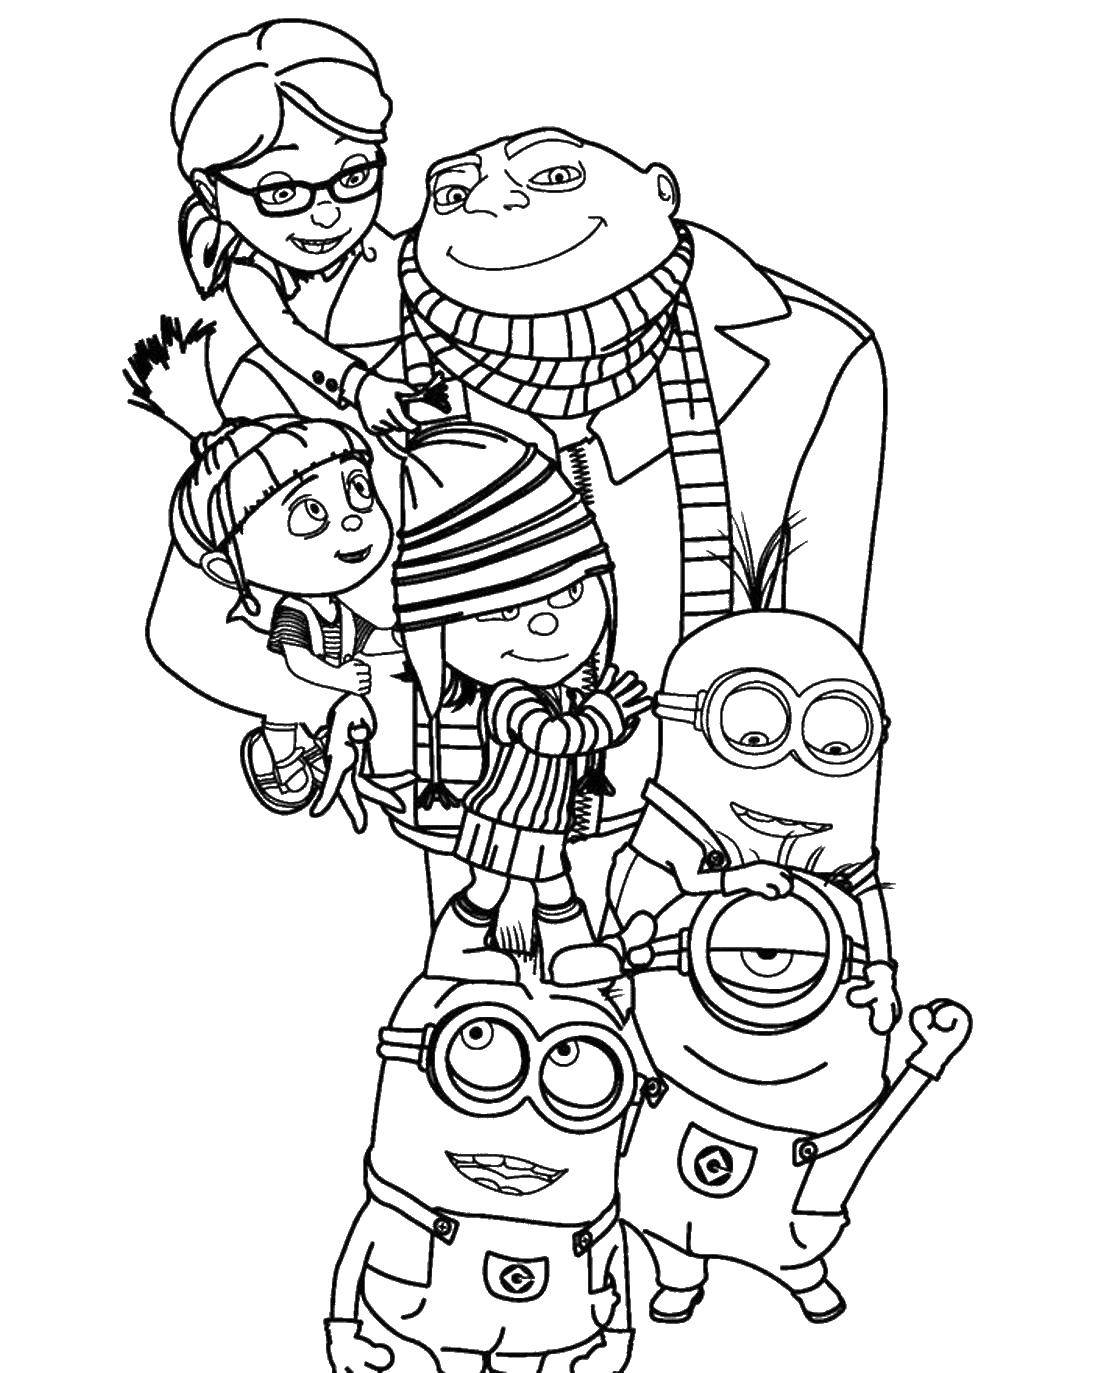 Coloring Despicable me girls. Category the minions. Tags:  the minions.